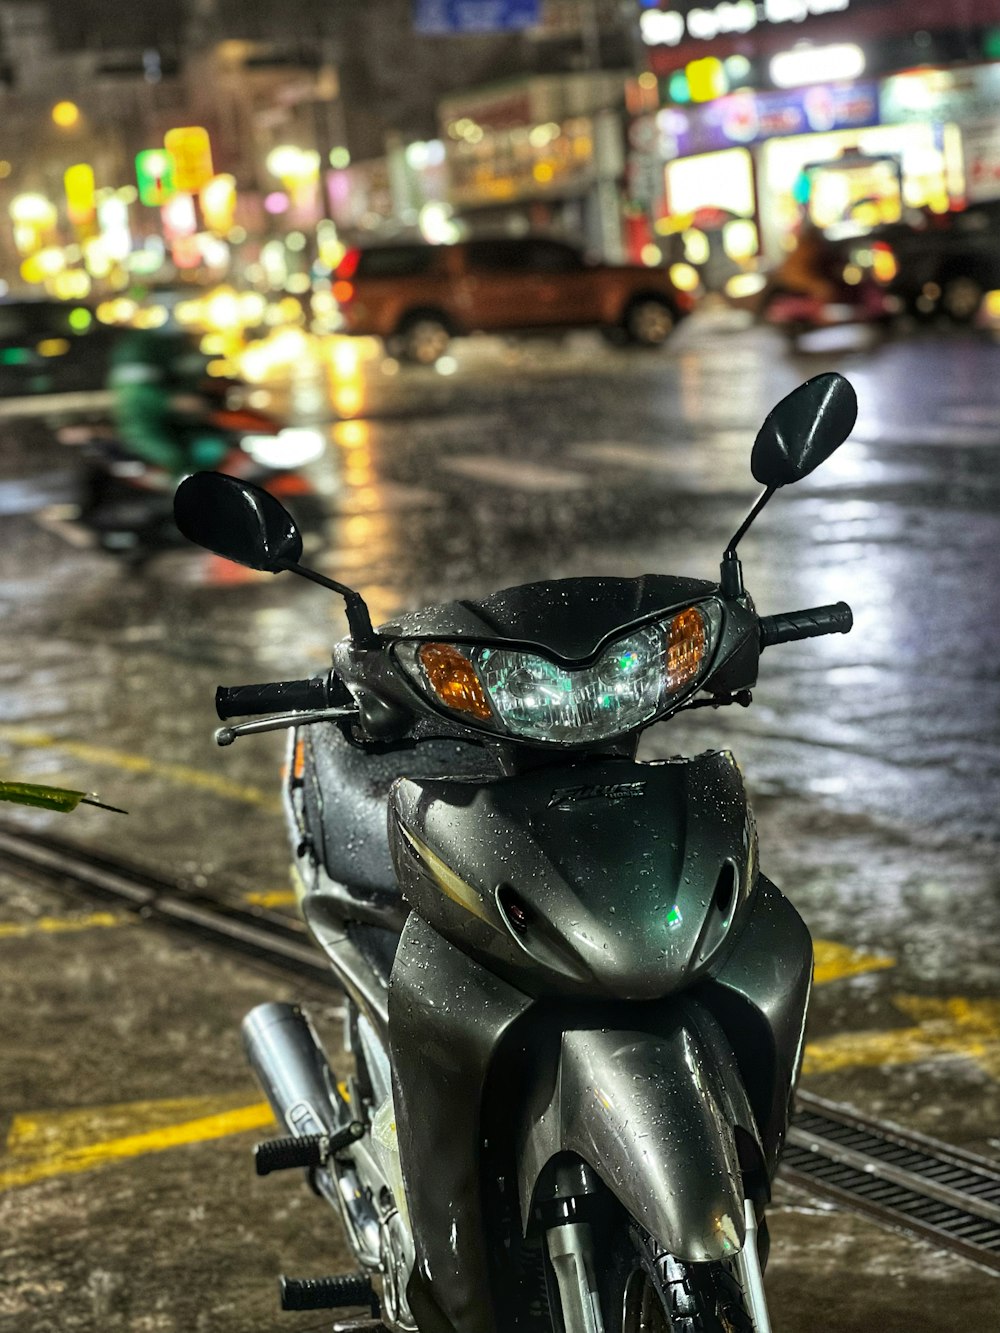 a motorcycle parked on the side of a street